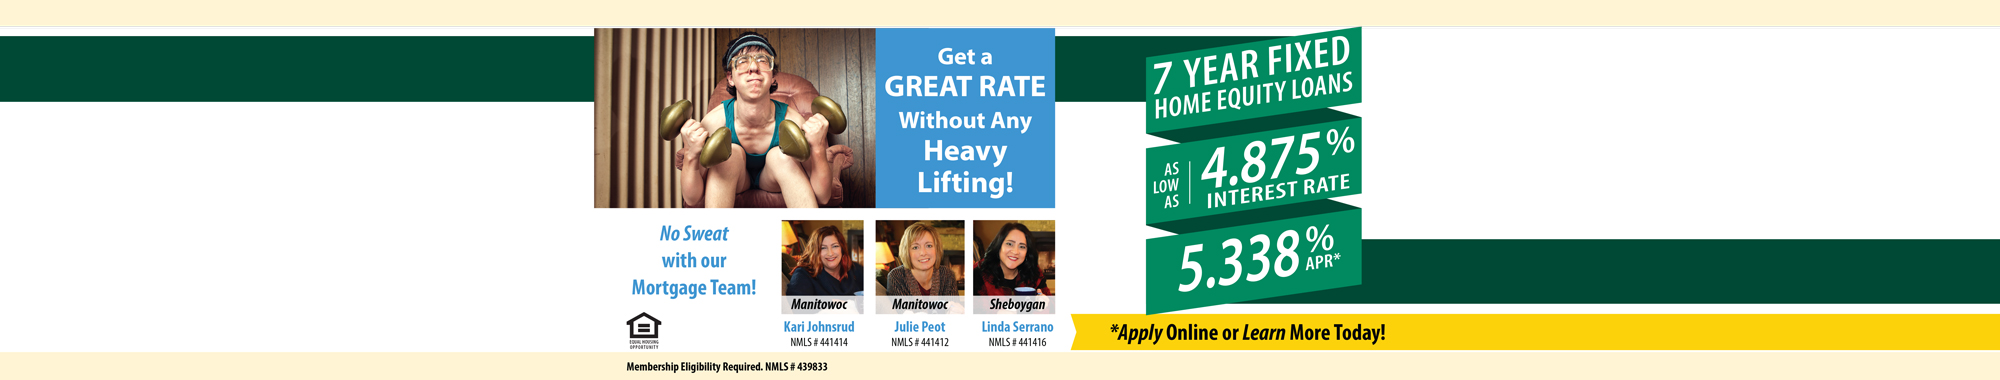 Get A GREAT RATE Without Any Heavy Lifting! Apply Online or Learn More Today!